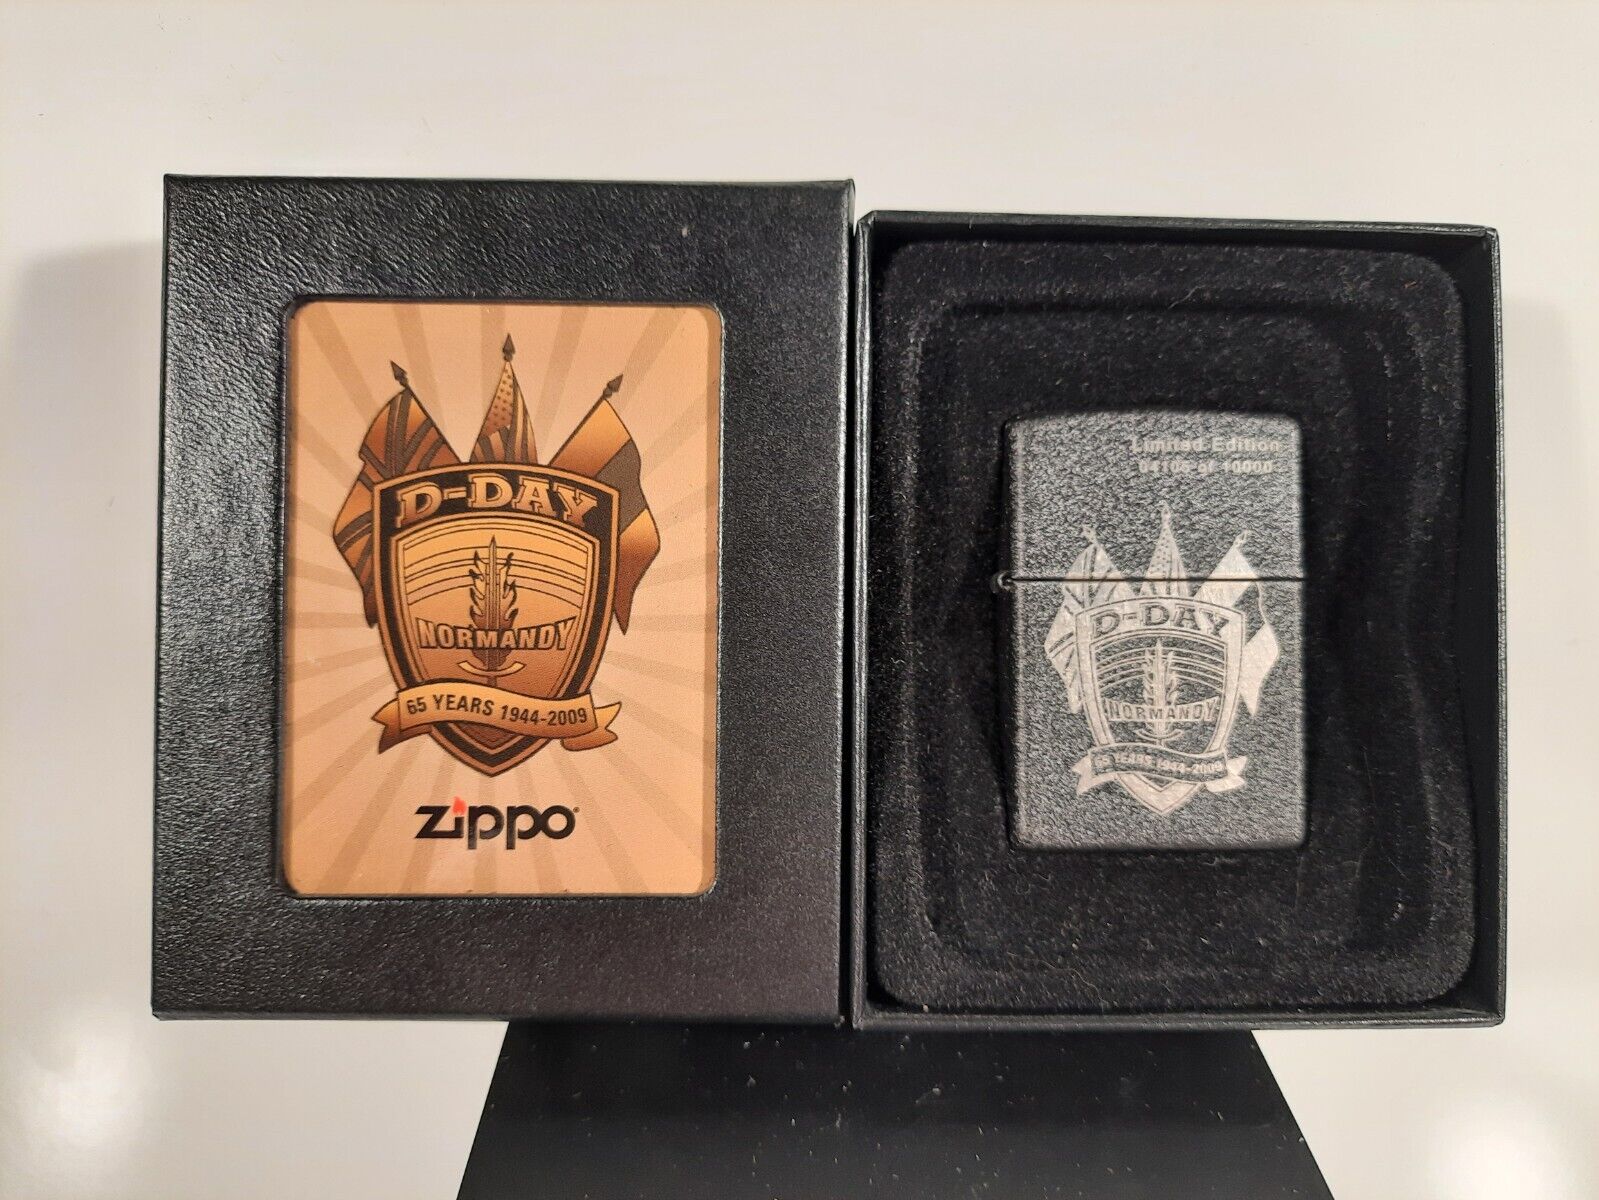 ZIPPO 65TH ANNIVERSARY D-DAY COMMERATIVE LIGHTER NEW NEVER STRUCK